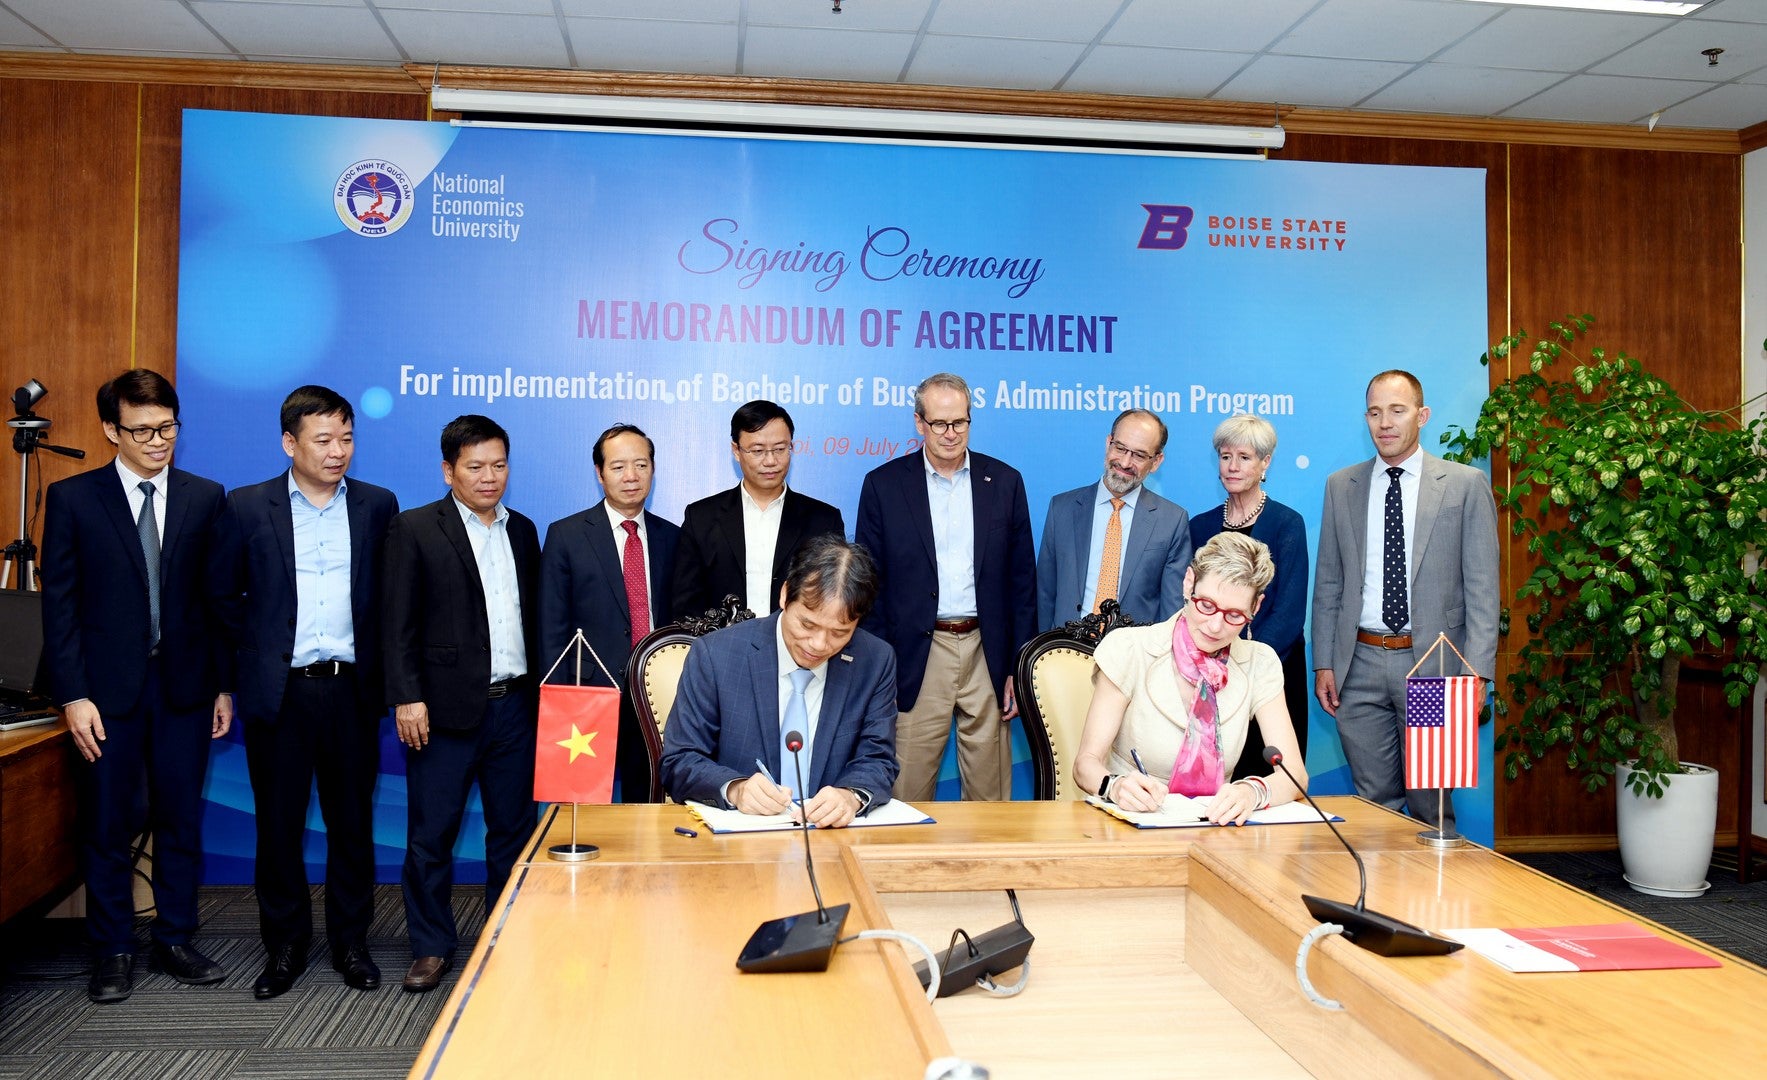 Members of Boise State and National Economics University in Vietnam gather in a conference room to sign new agreement